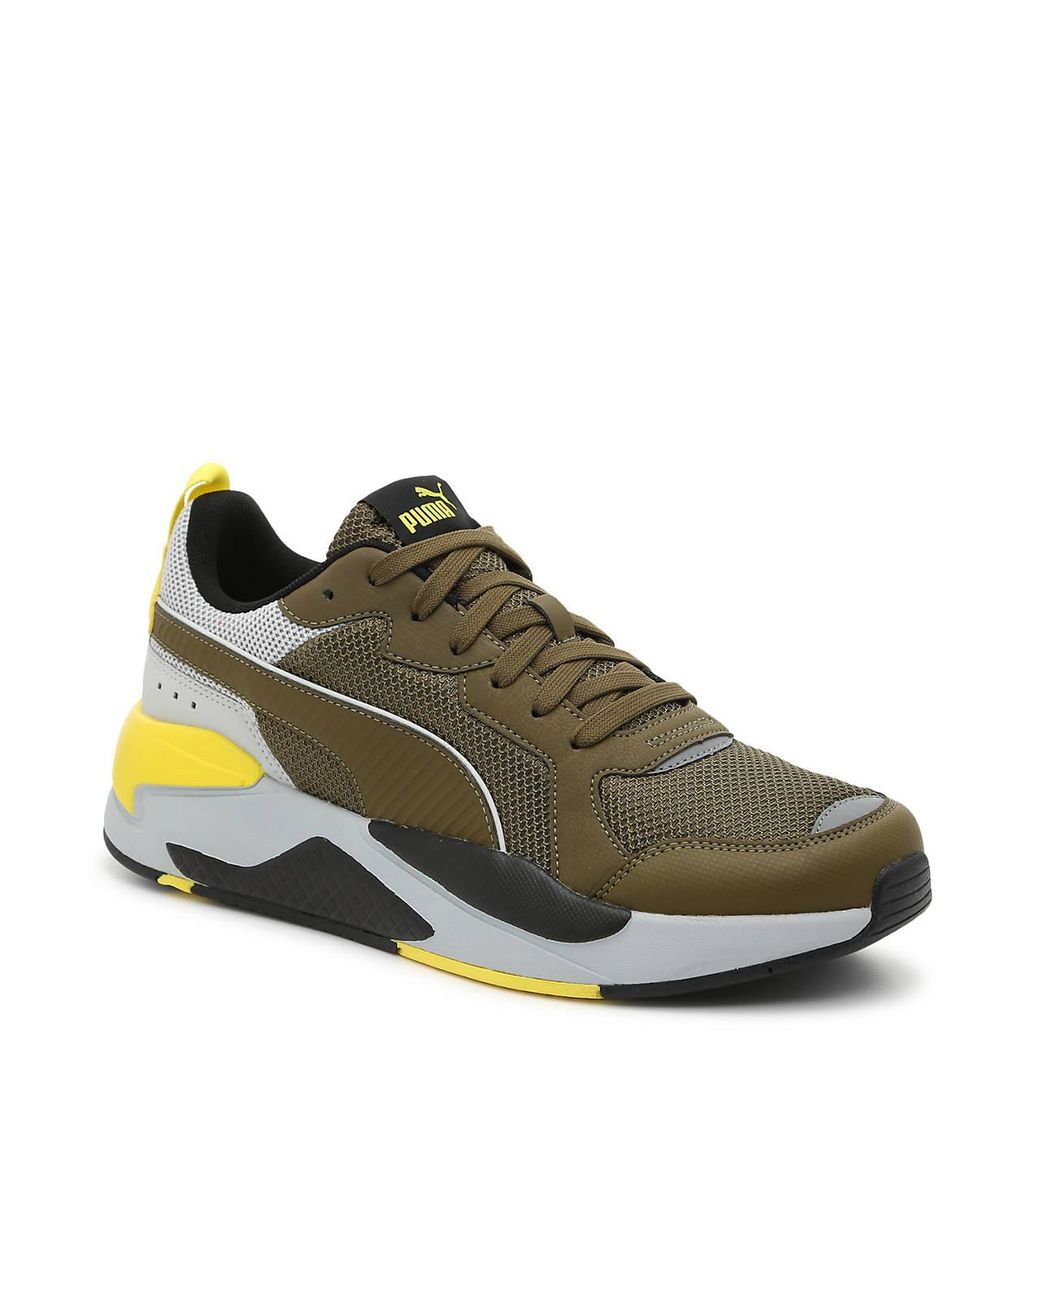 PUMA X-ray Sneaker in Olive Green/Grey/Yellow (Green) for Men | Lyst